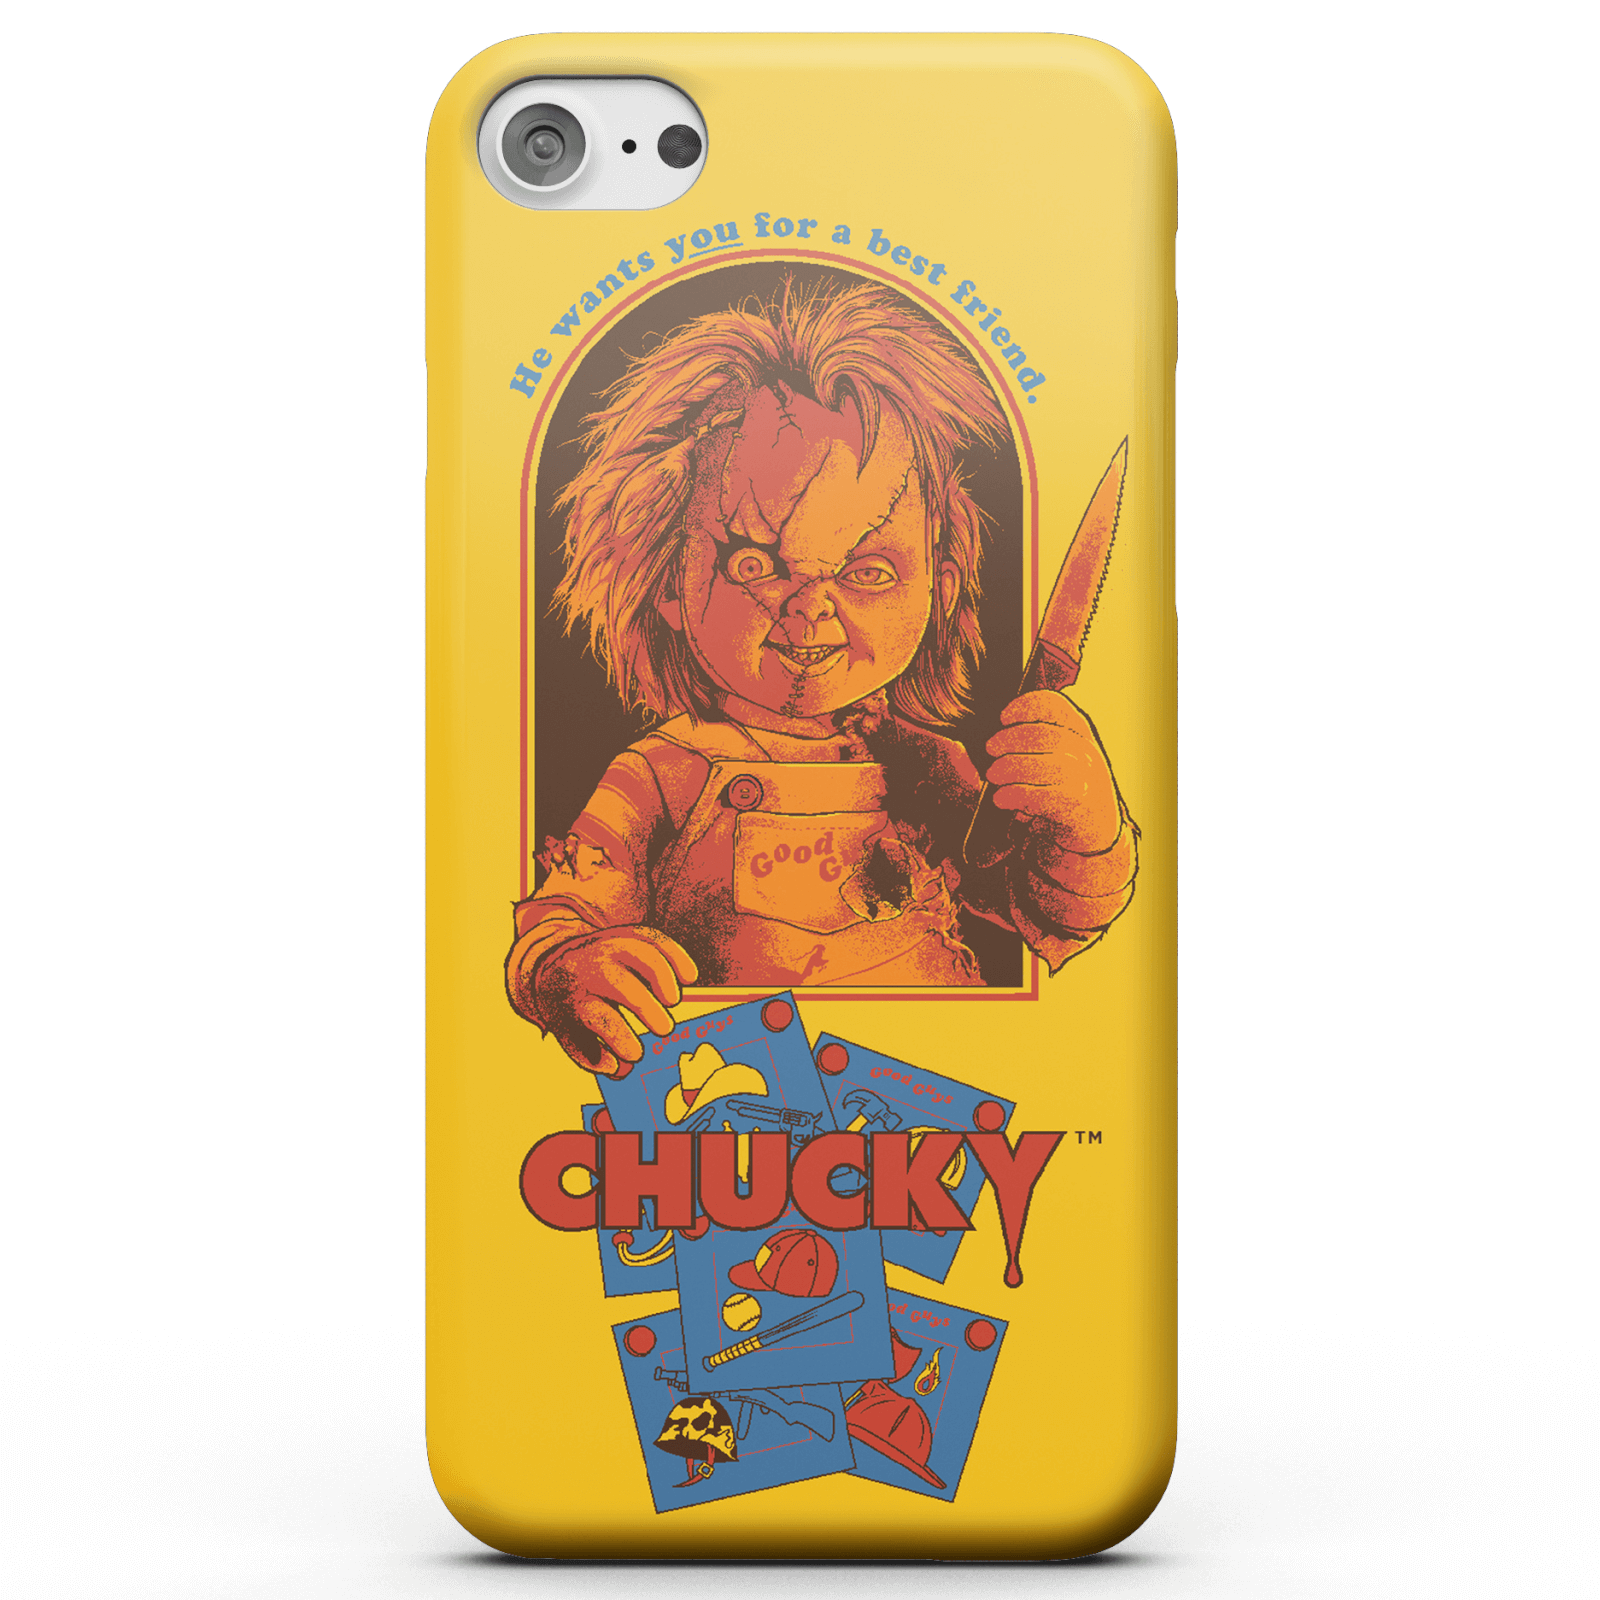 Funda Móvil Chucky Out Of The Box para iPhone y Android - iPhone 6 Plus - Carcasa doble capa - Mate